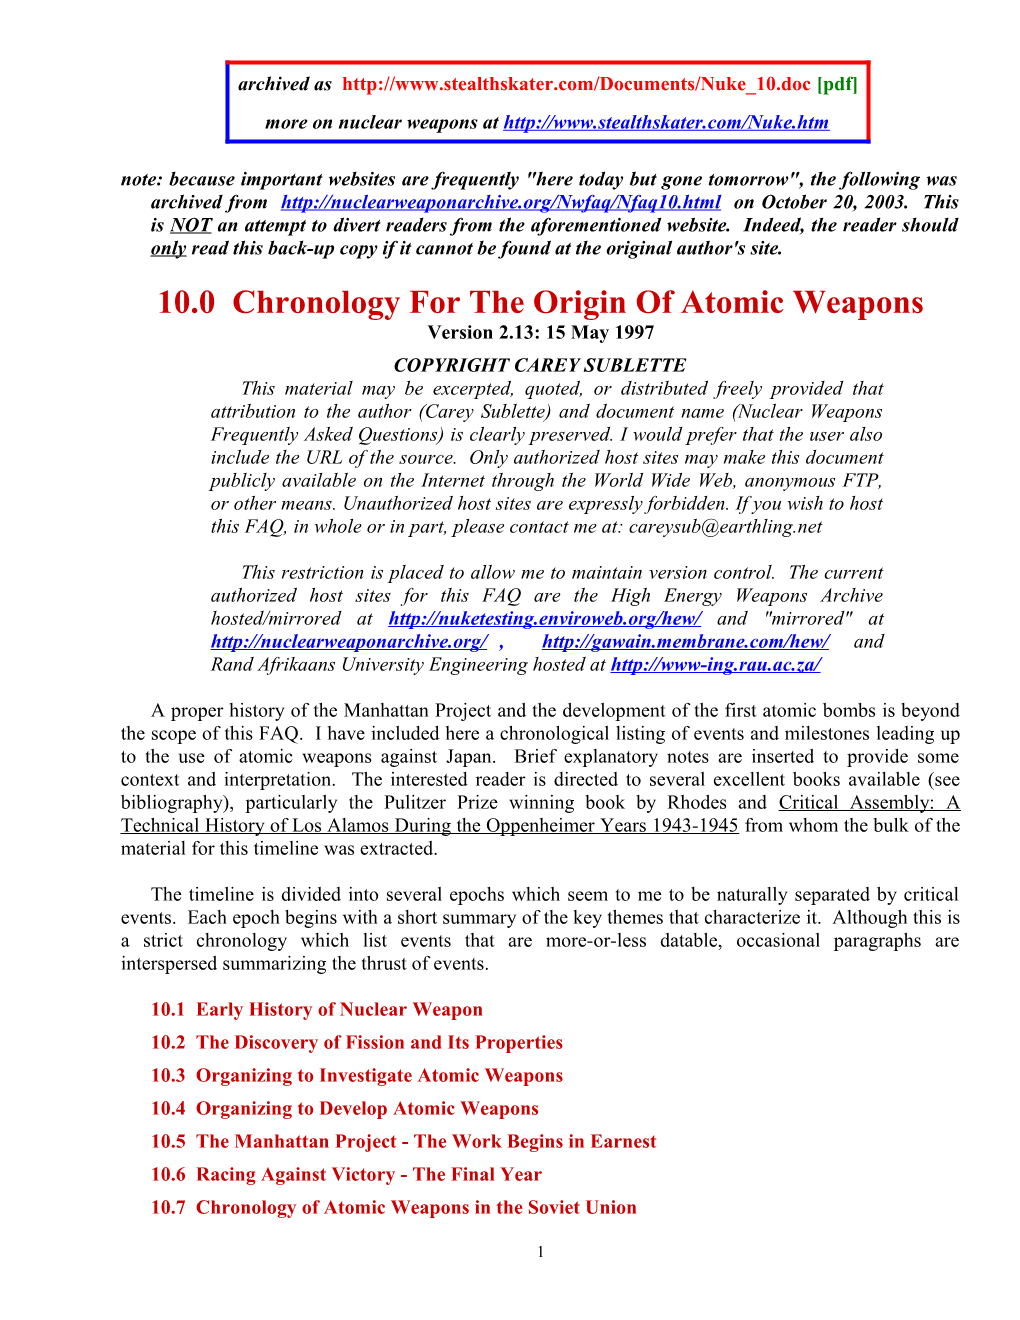 10.0 Chronology for the Origin of Atomic Weapons